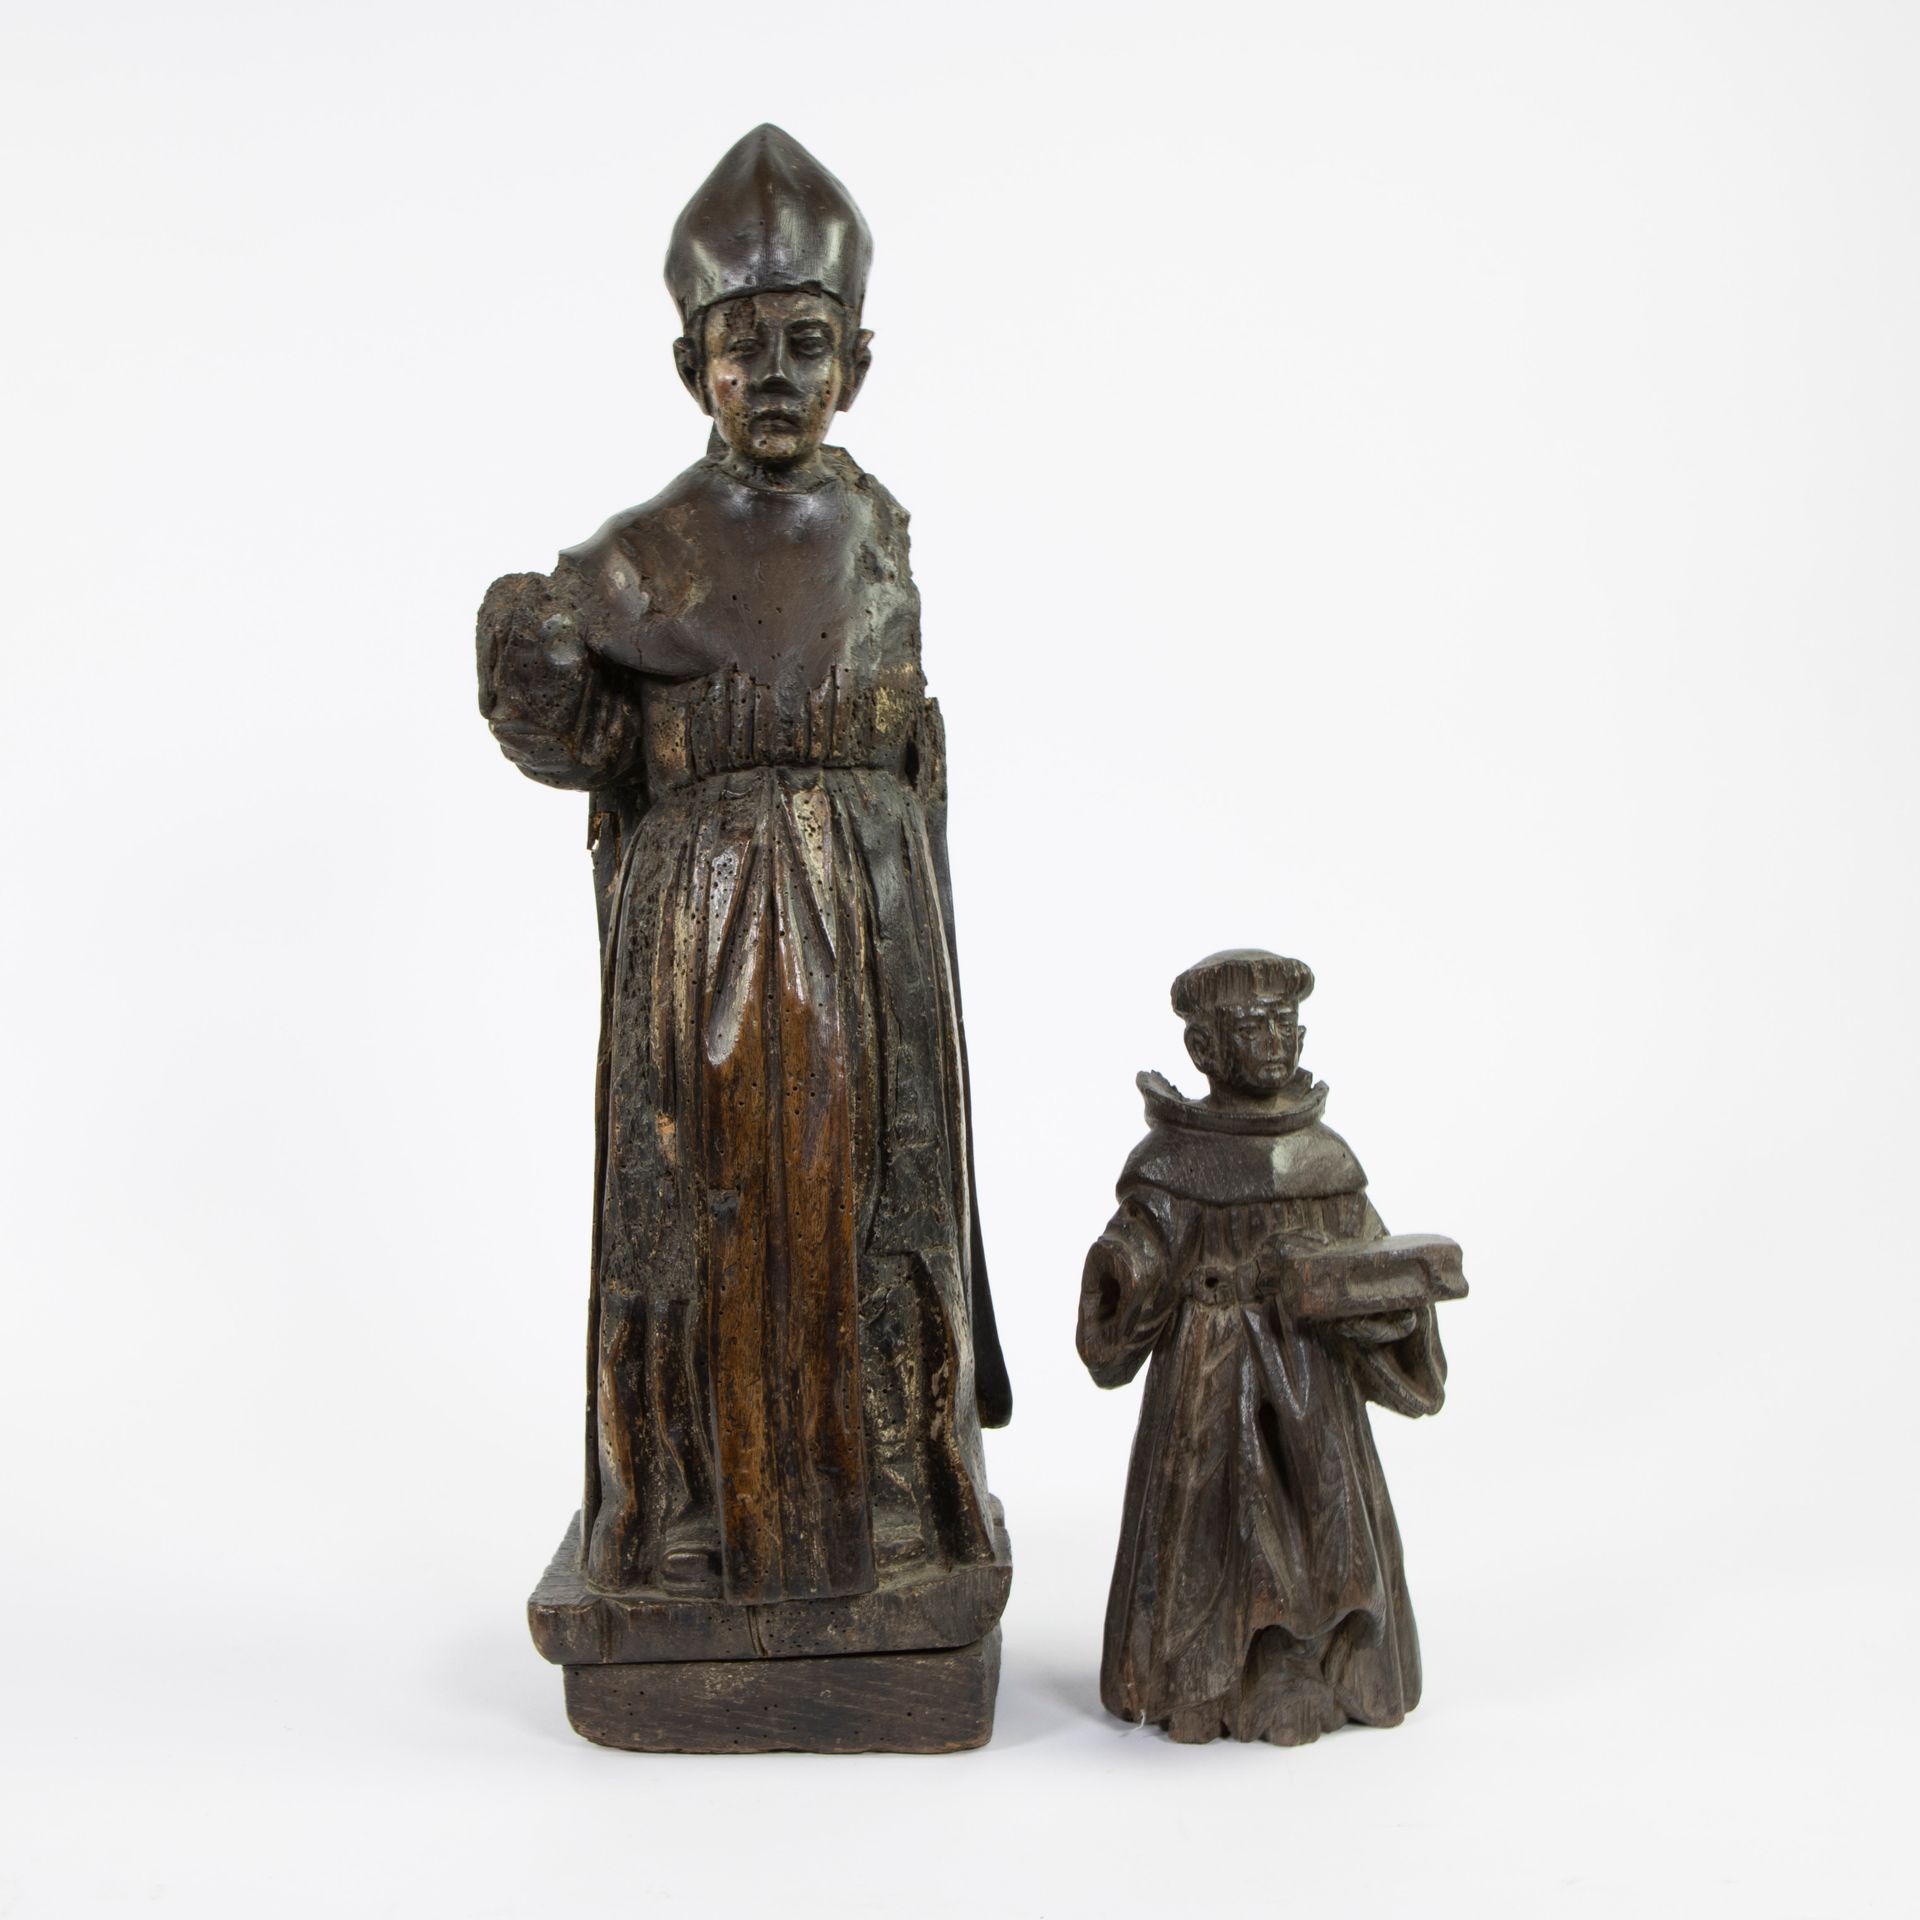 Null Bishop and Father with book 18th century South European
Bishop and Father w&hellip;